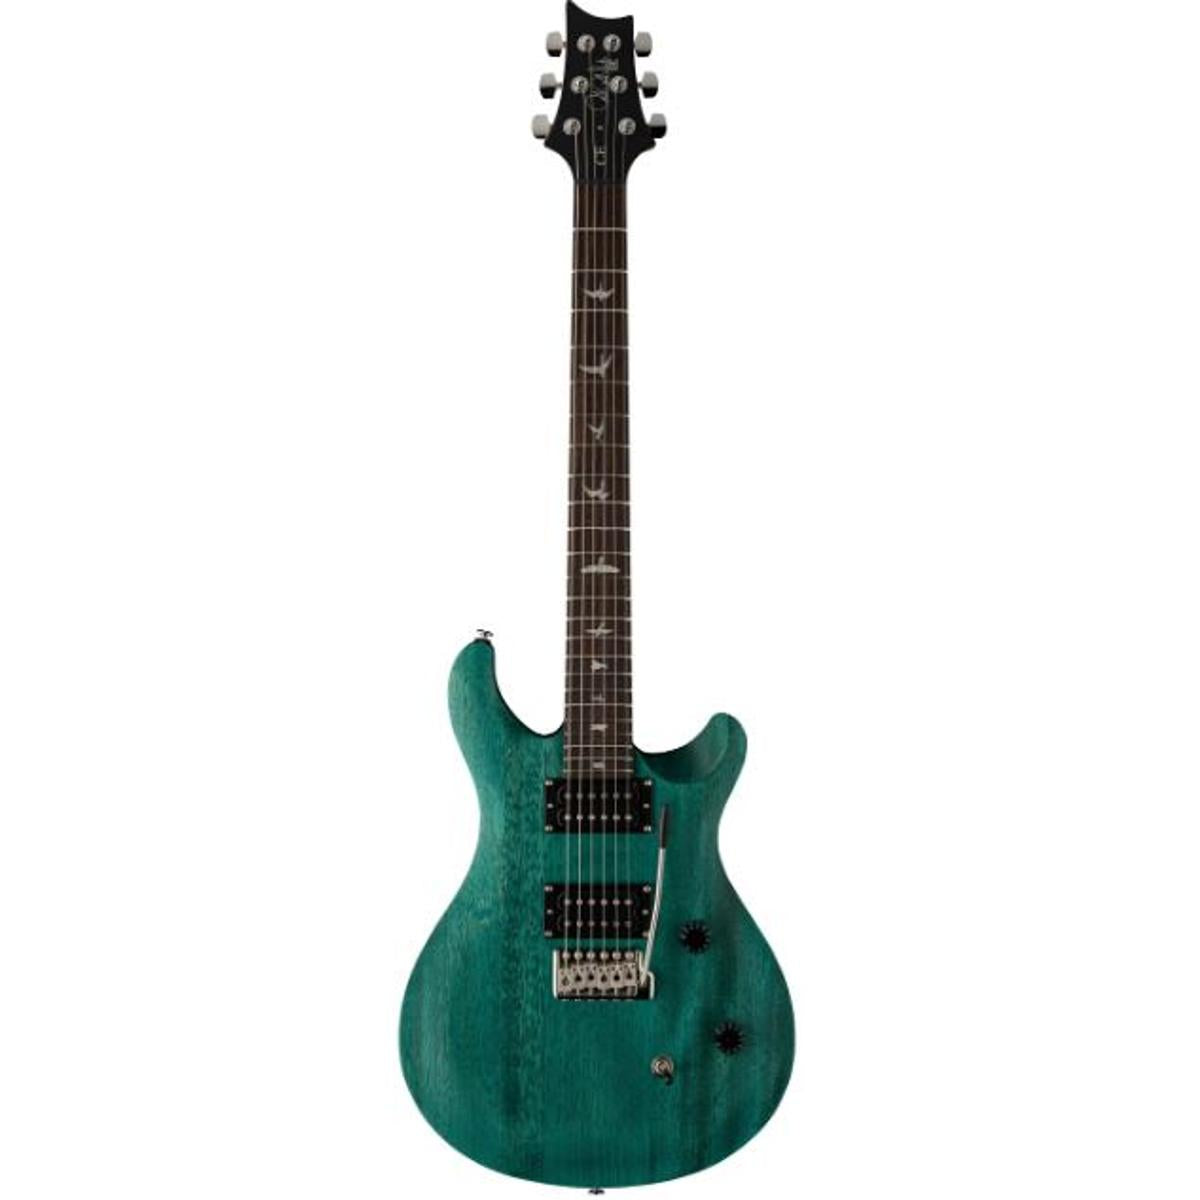 PRS Paul Reed Smith SE CE24 Standard Satin Bolt-On Electric Guitar Turquoise & Shallow Violin Top Carve